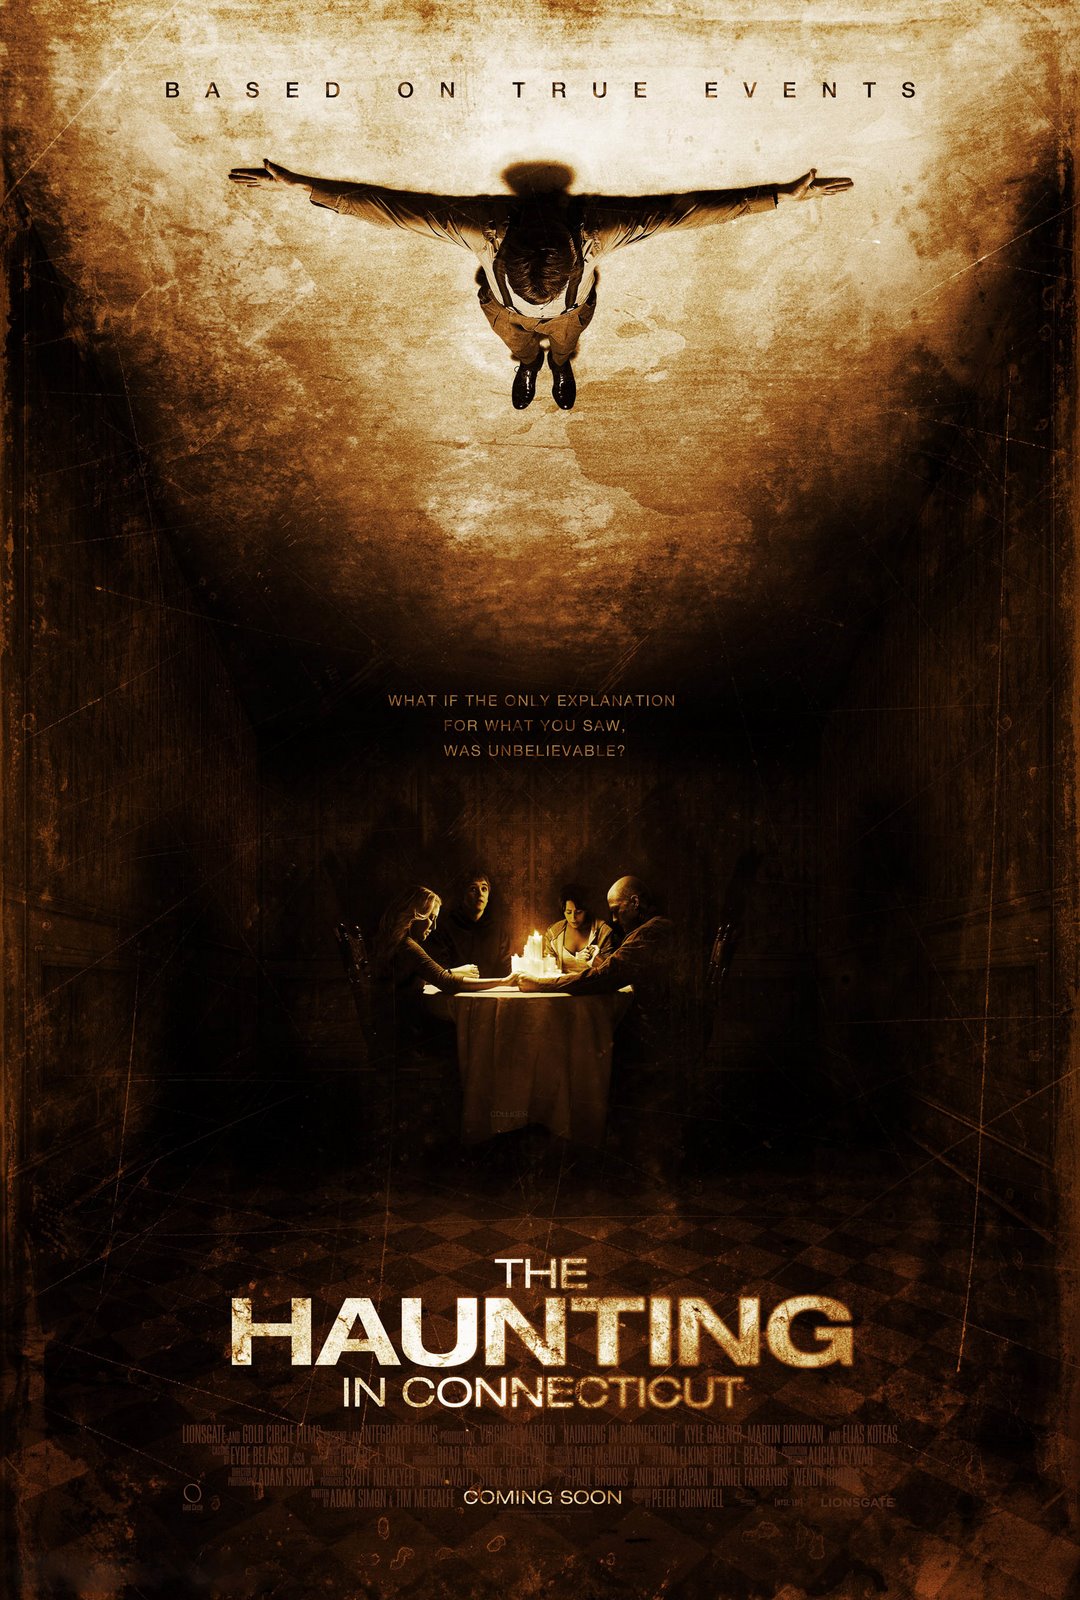 [The+Haunting+In+Connecticut+(2009).jpg]